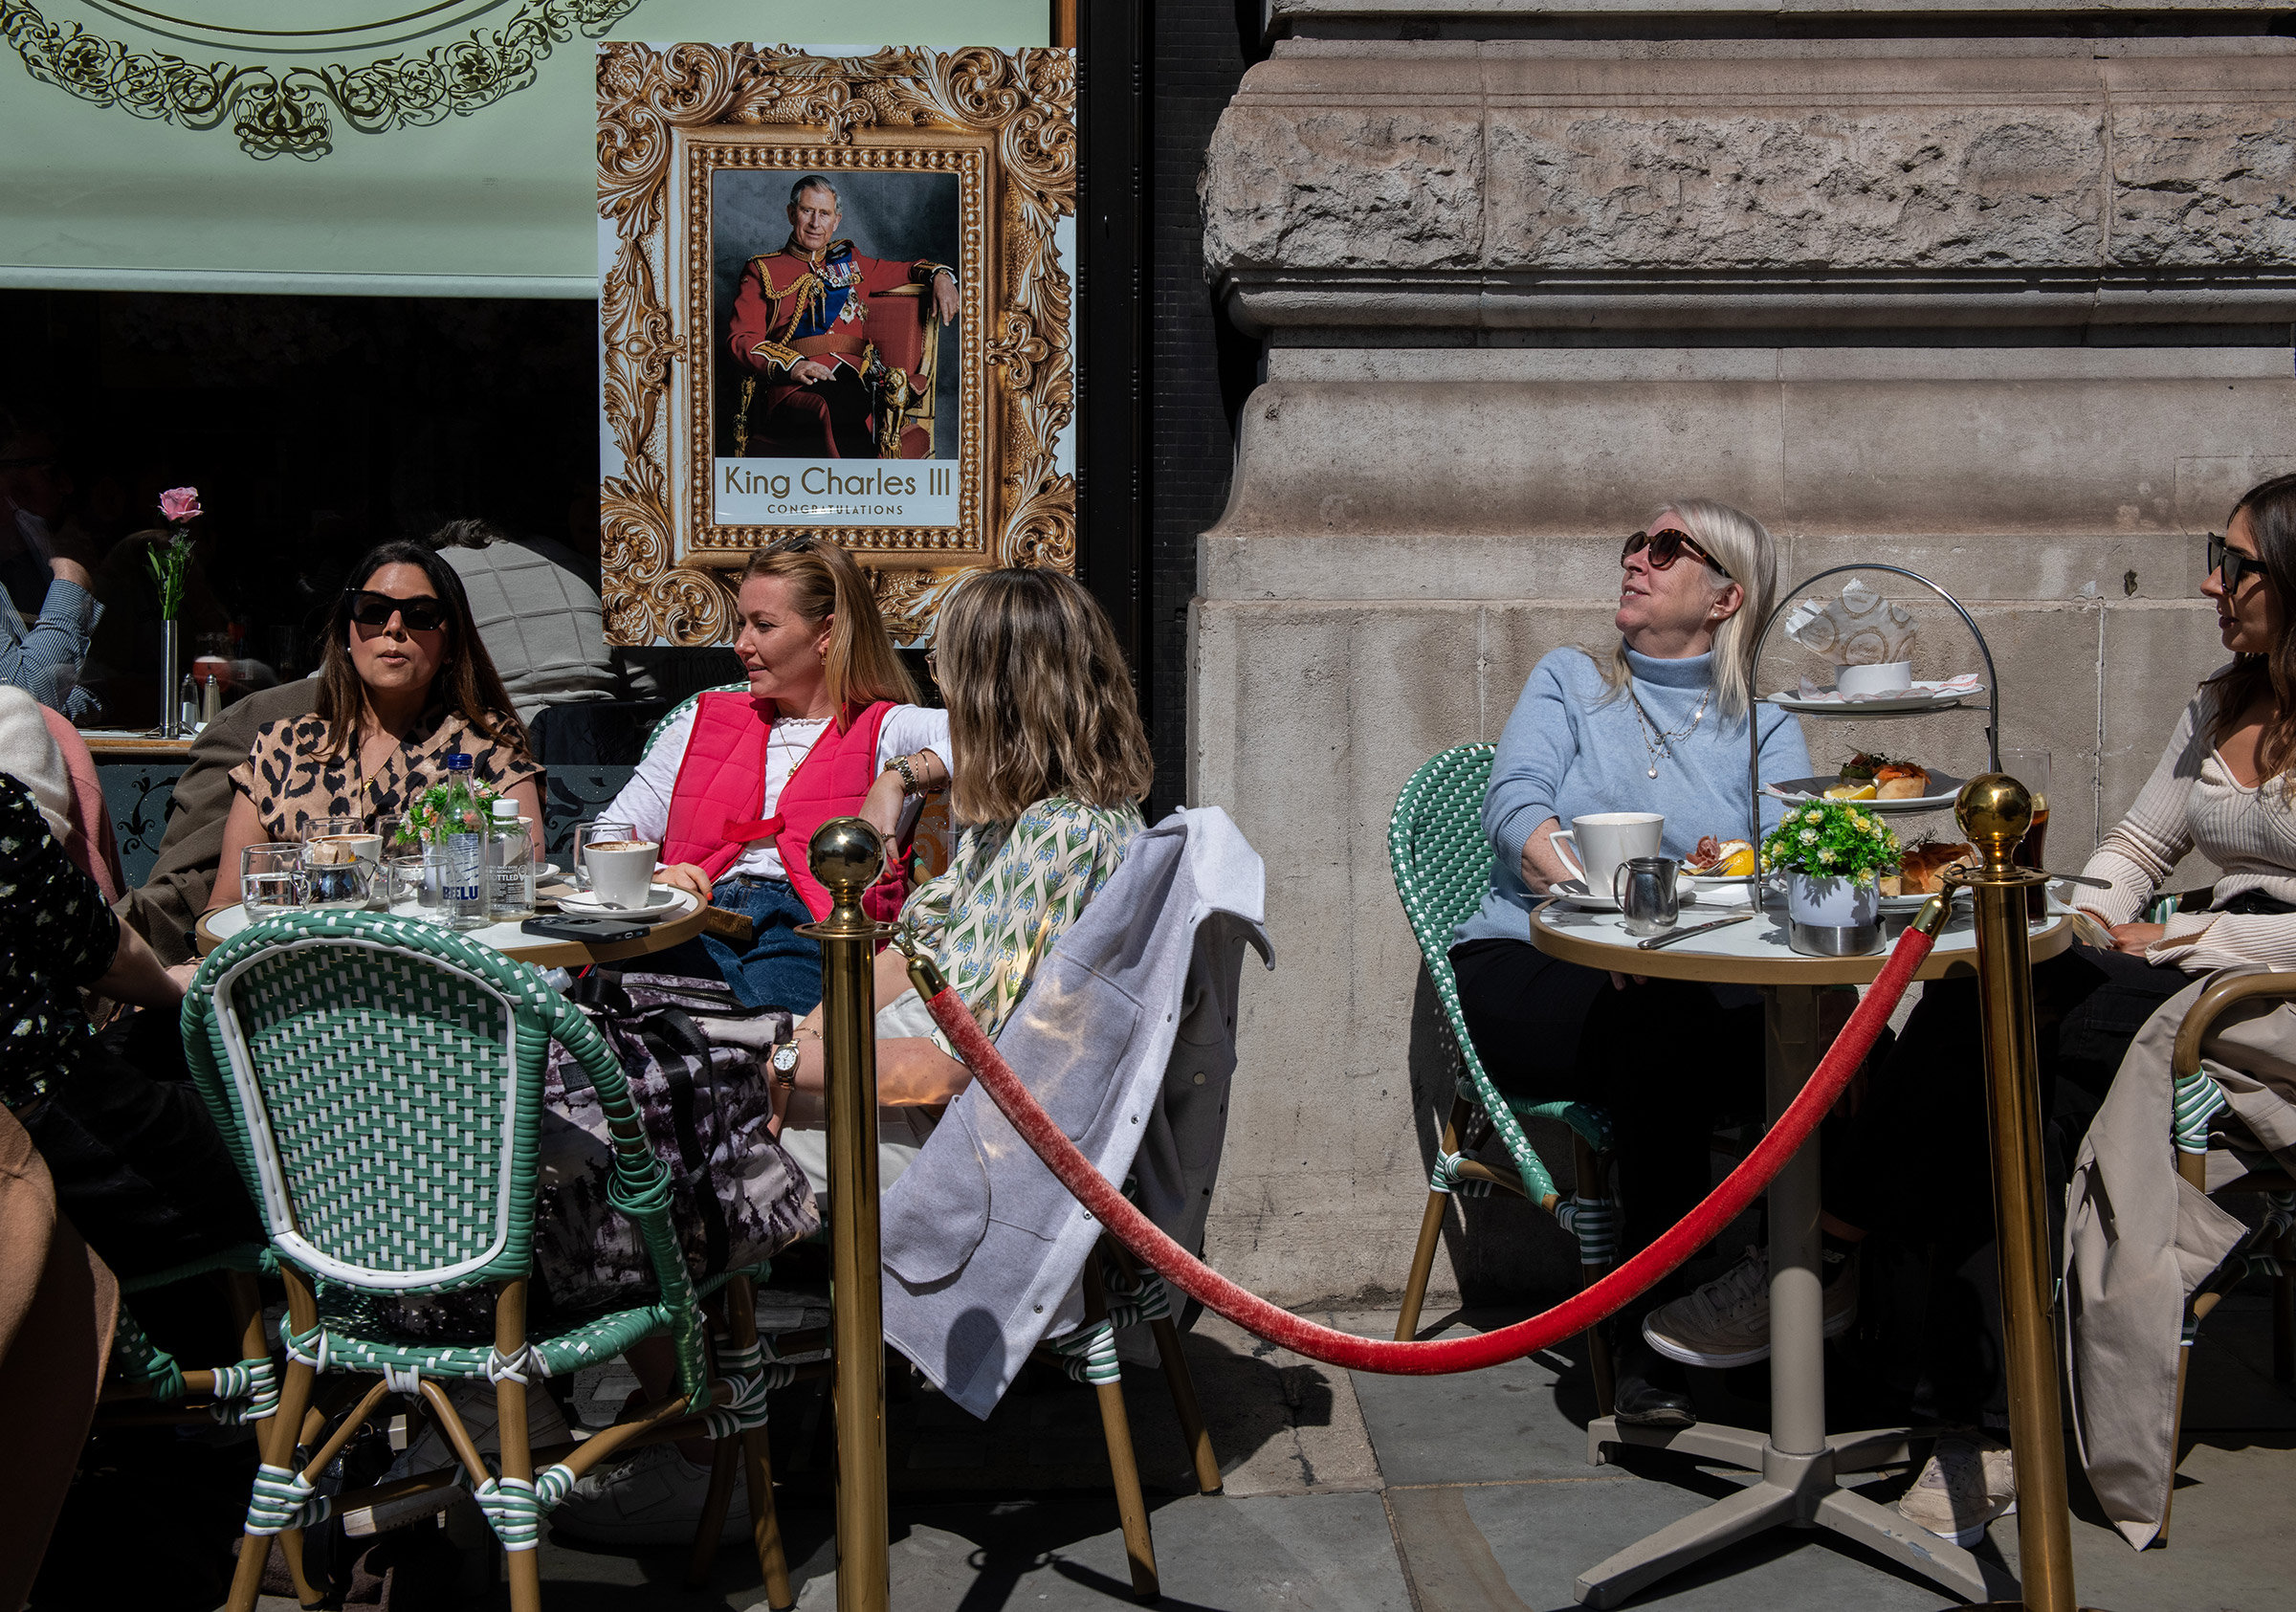 People have afternoon tea outside a cafe next to a poster of King Charles III on April 29.